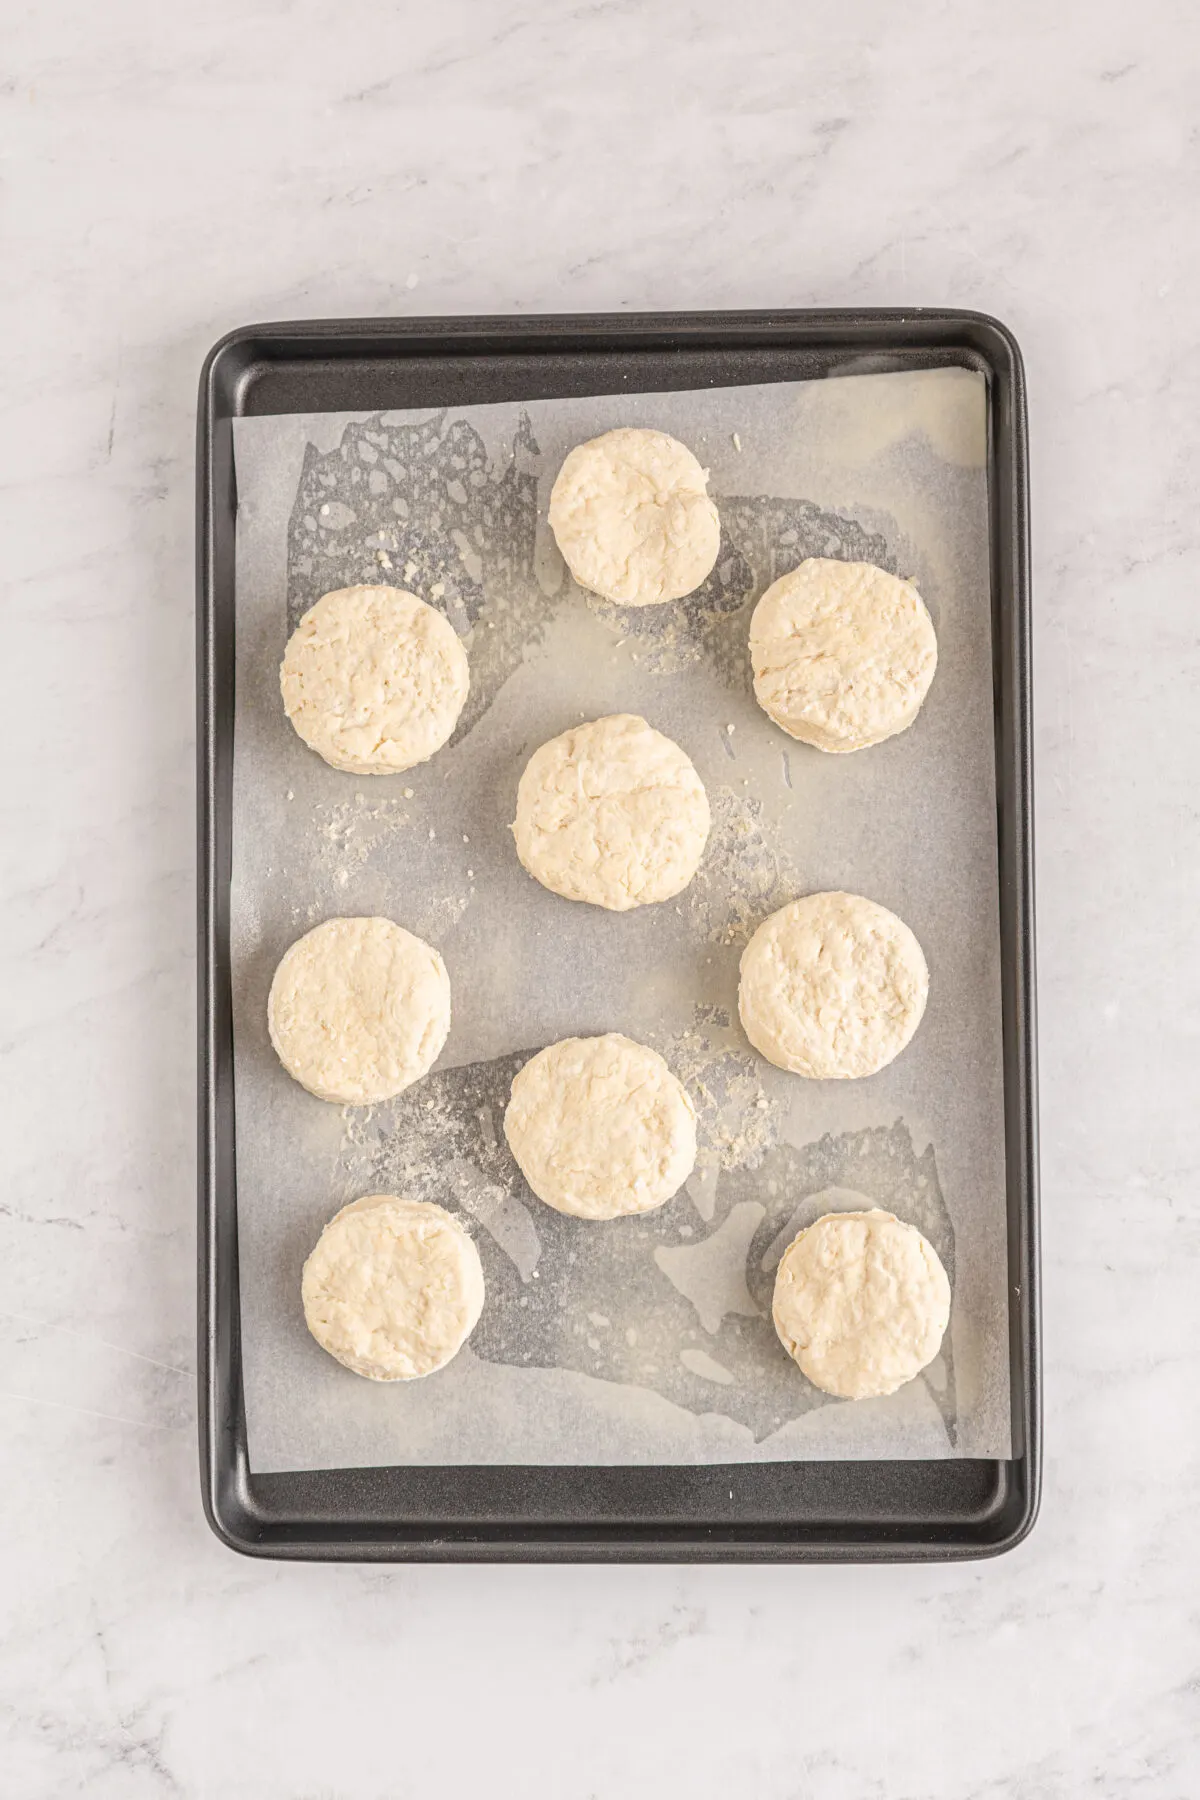 Unbaked biscuits on a baking sheet